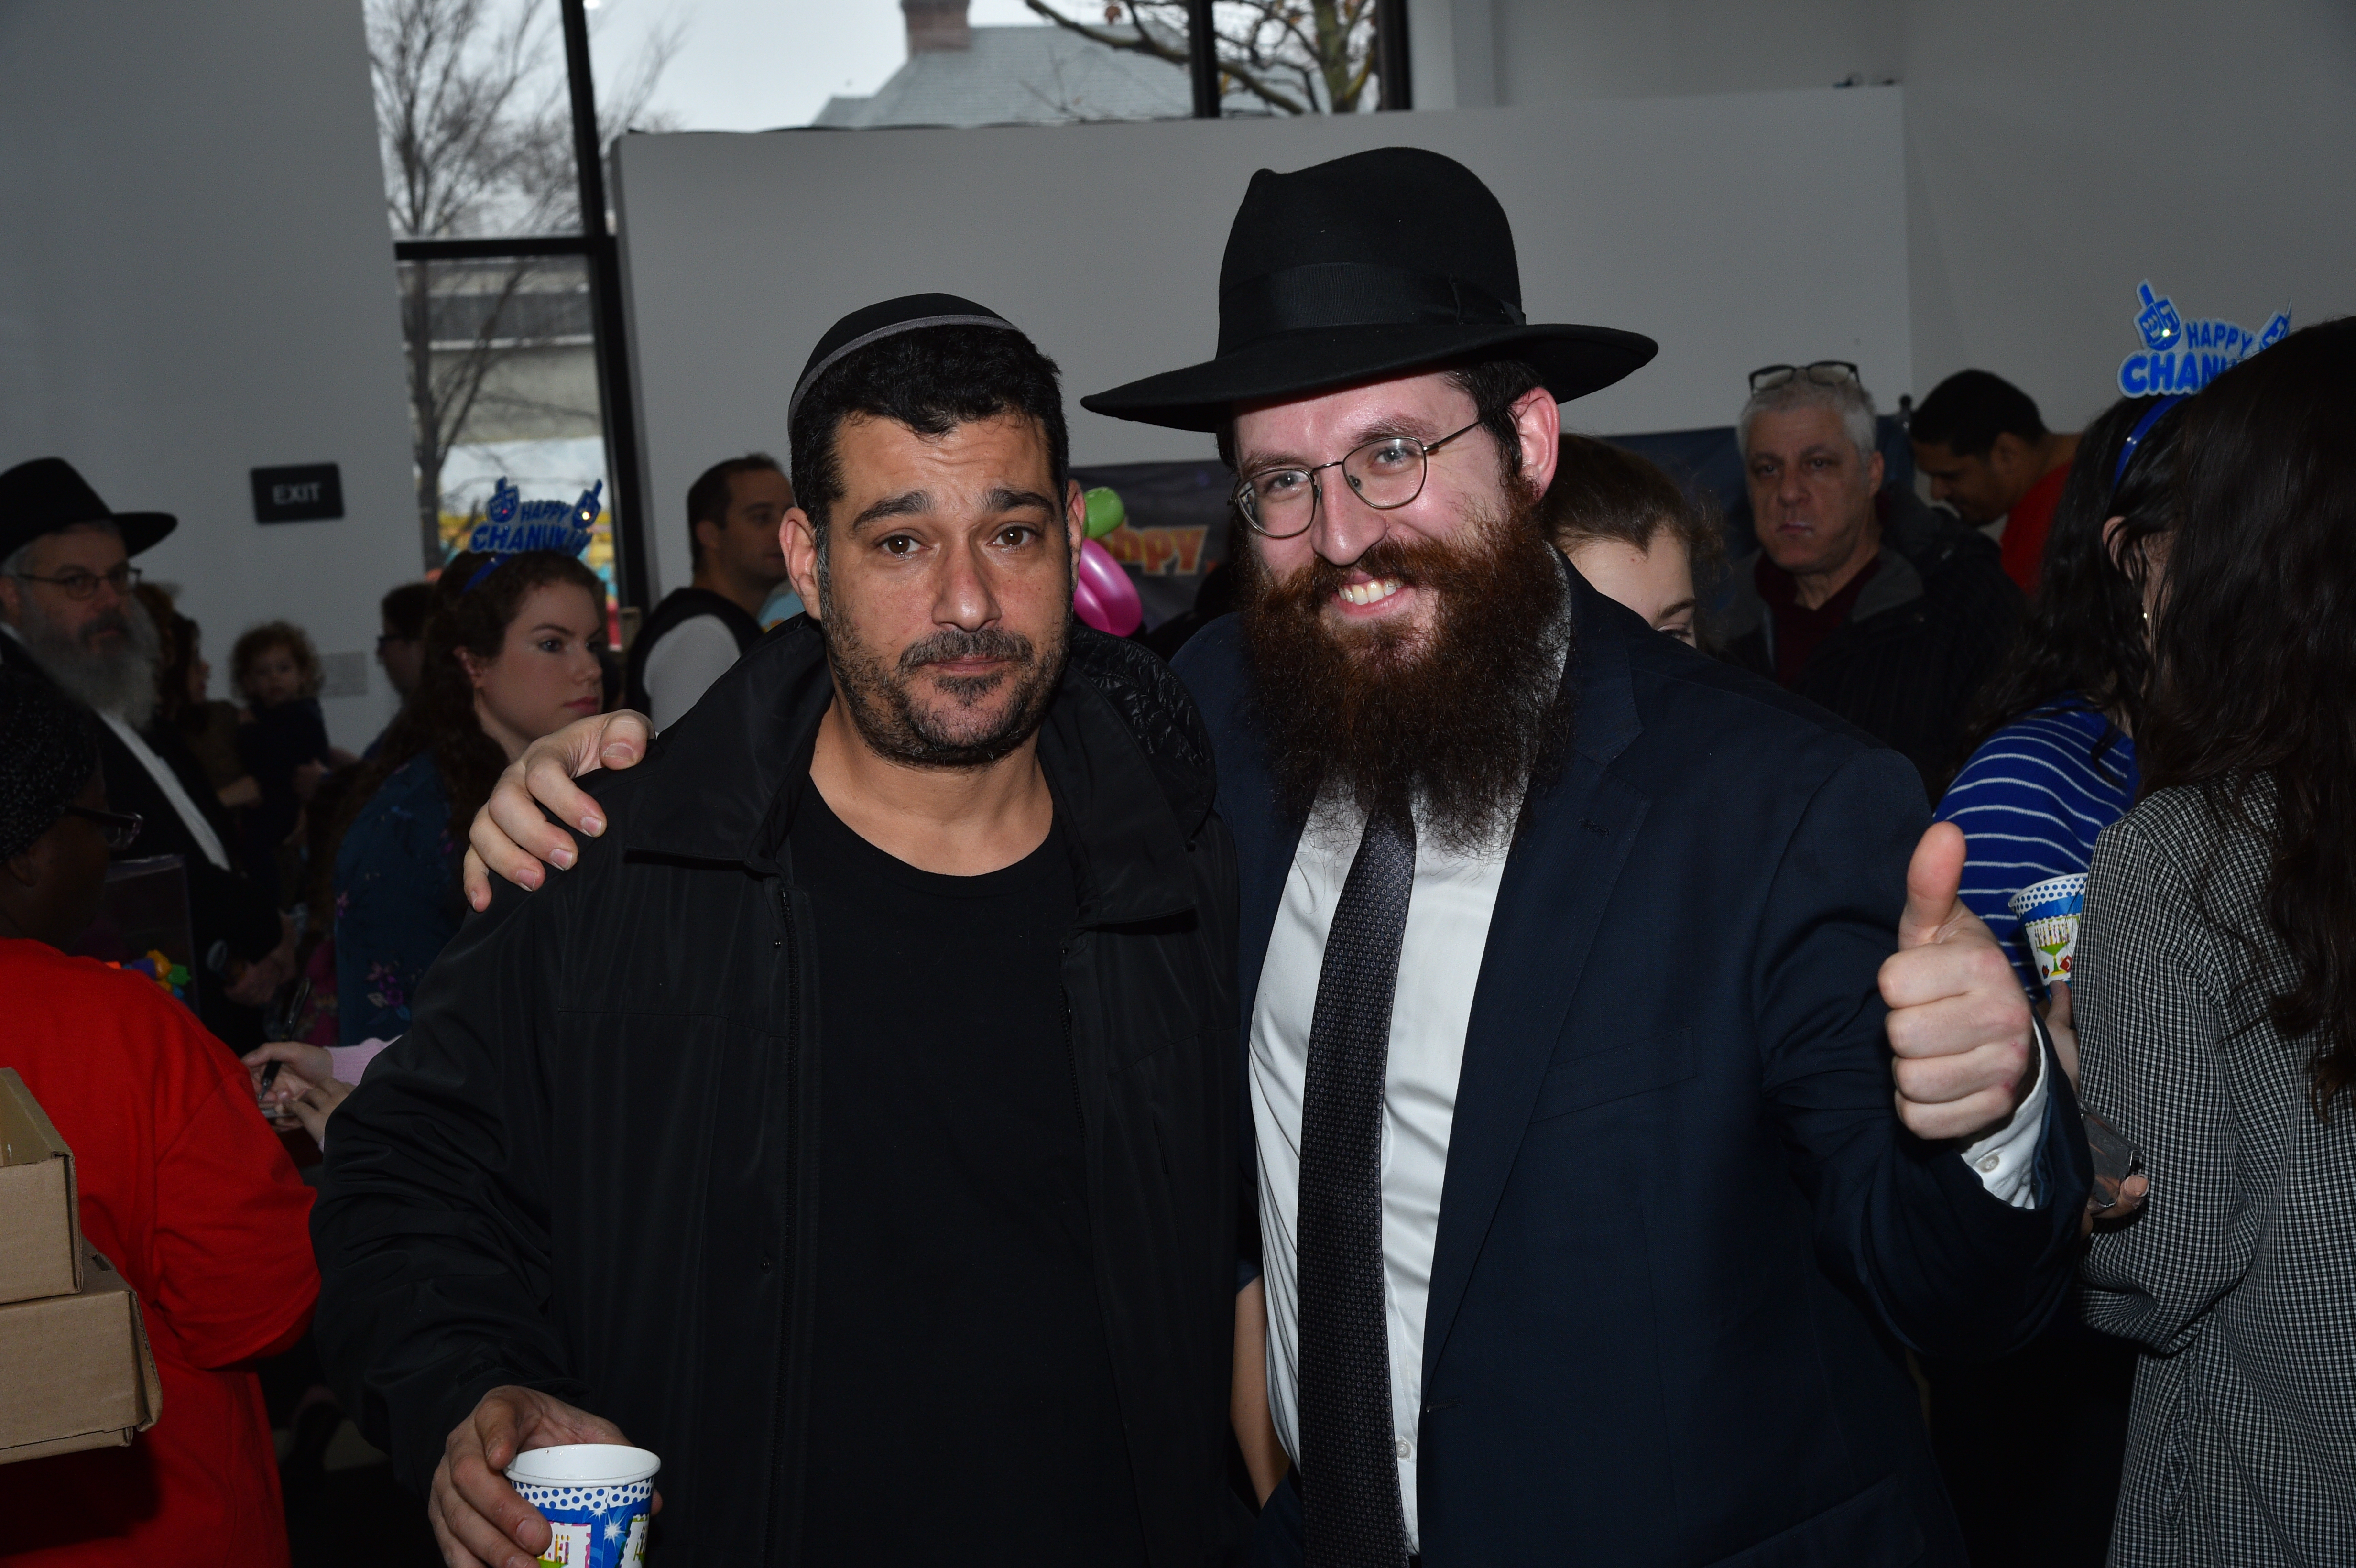 An attendee with Rabbi Yehuda Levin. Photos courtesy of Central Brooklyn Chabad